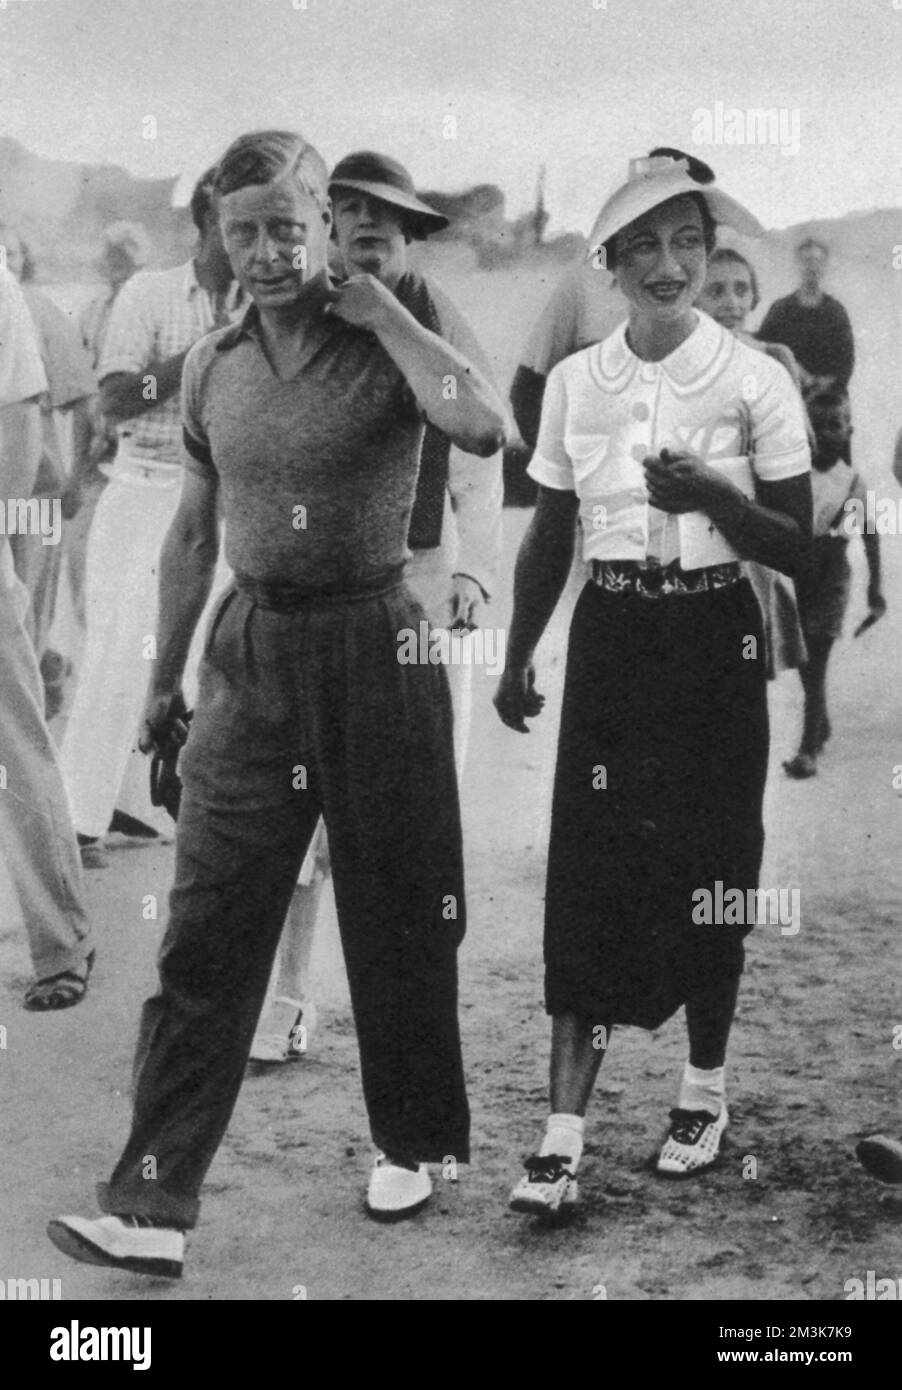 A photograph of the Prince of Wales and Wallis Simpson near Split, during the royal cruise down the Damatian coast in 1935.   Prince Edward had to abdicate the throne in order to marry divorcee Wallis Simpson.  12th December 1936 Stock Photo